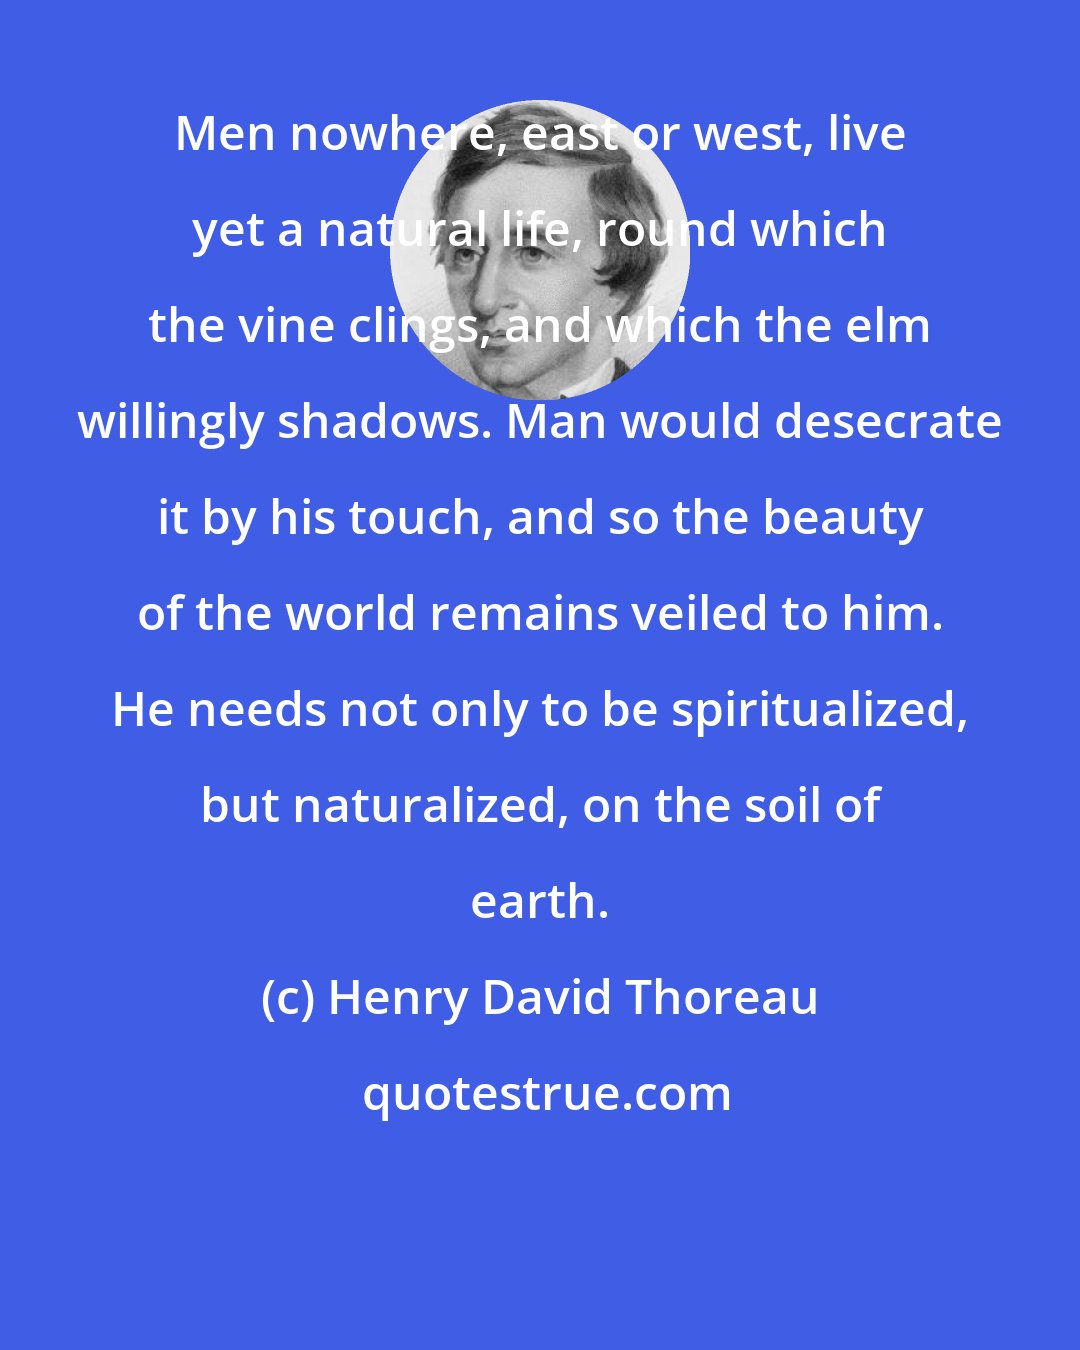 Henry David Thoreau: Men nowhere, east or west, live yet a natural life, round which the vine clings, and which the elm willingly shadows. Man would desecrate it by his touch, and so the beauty of the world remains veiled to him. He needs not only to be spiritualized, but naturalized, on the soil of earth.